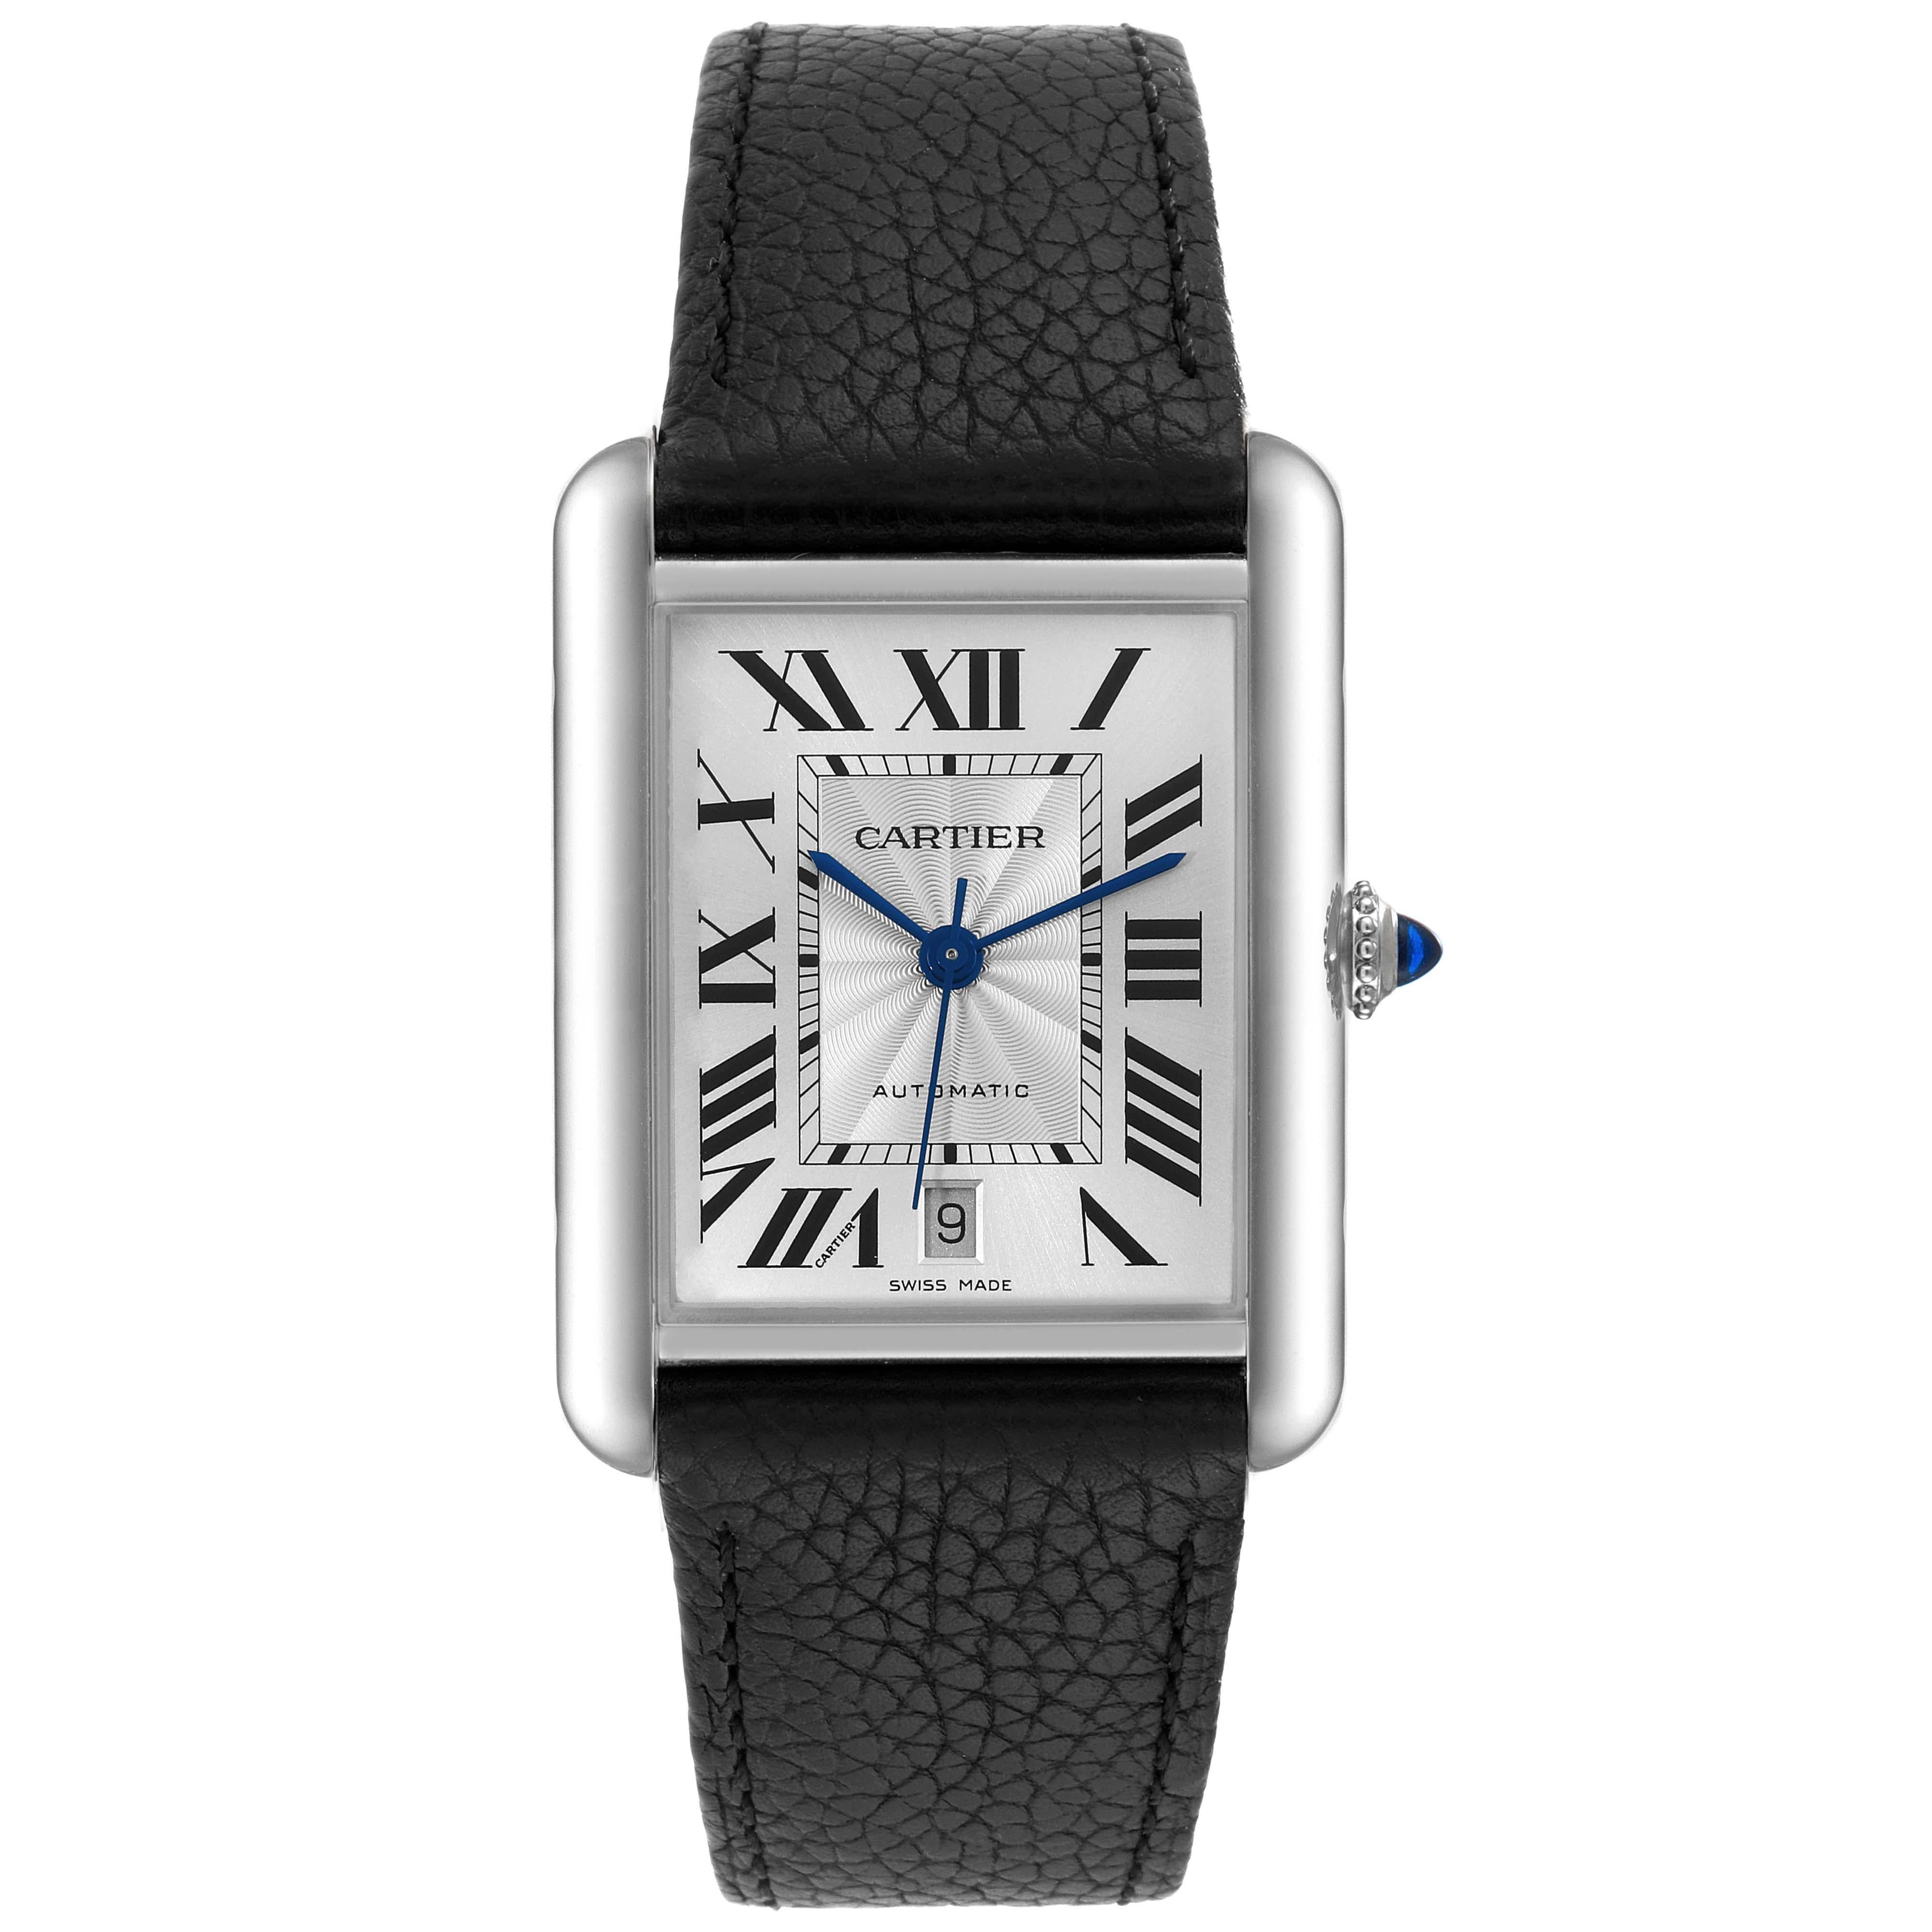 Cartier Tank Must Large Steel Silver Dial Mens Watch WSTA0040 Box Card. Automatic self-winding movement. Stainless steel case 31.0 x 41.0 mm. Circular grained crown set with the blue spinel cabochon. . Scratch resistant sapphire crystal. Silver